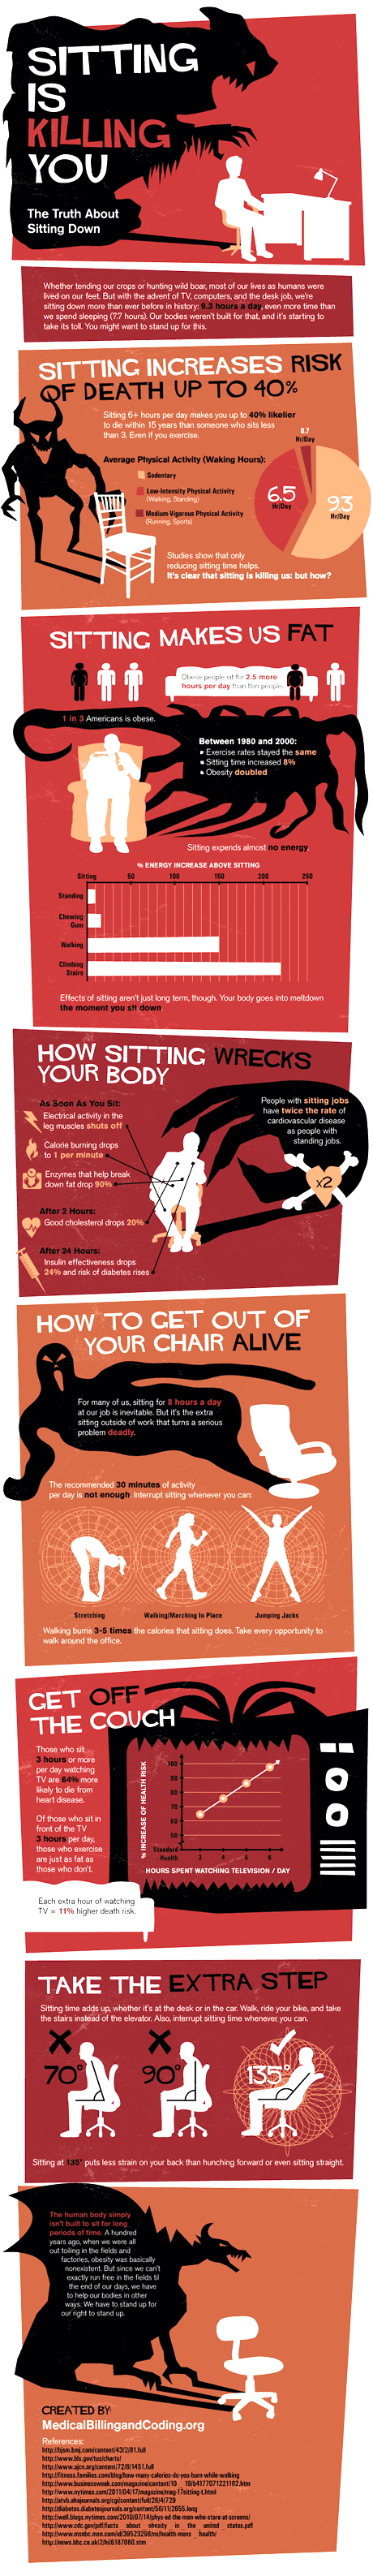 sitting is killing you infographic by medical billing and coding.org